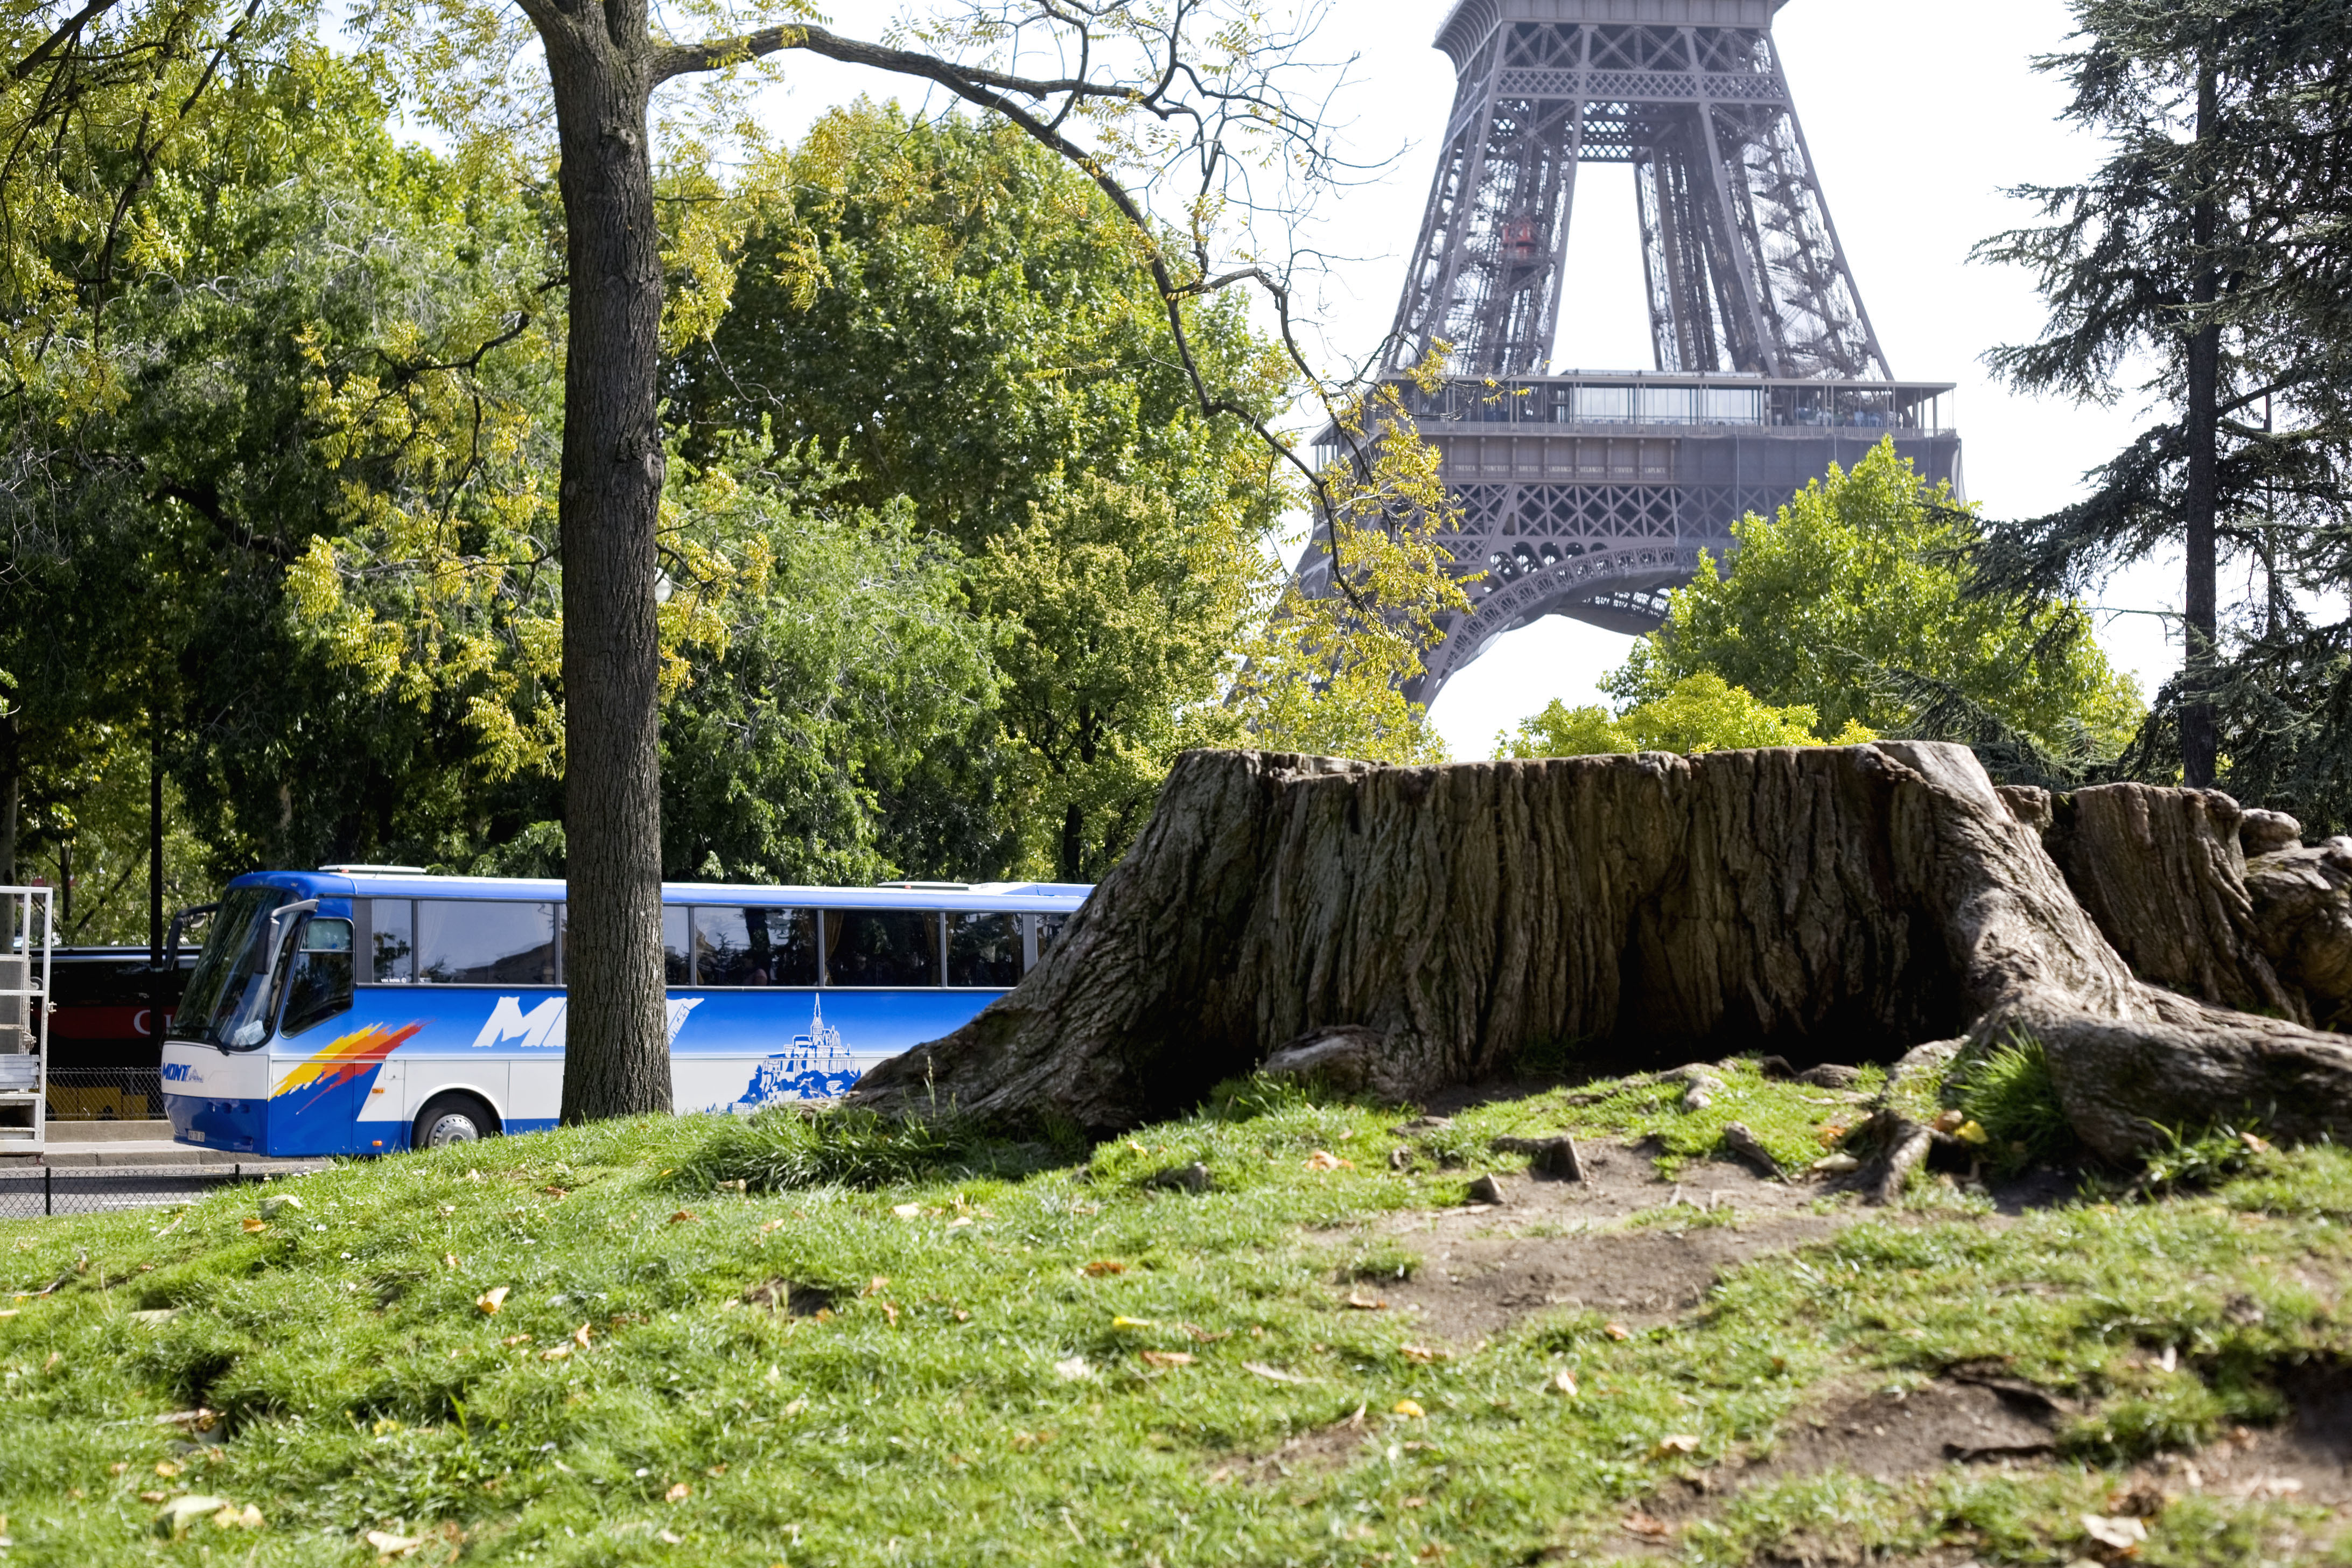 Eiffel Tower and tree